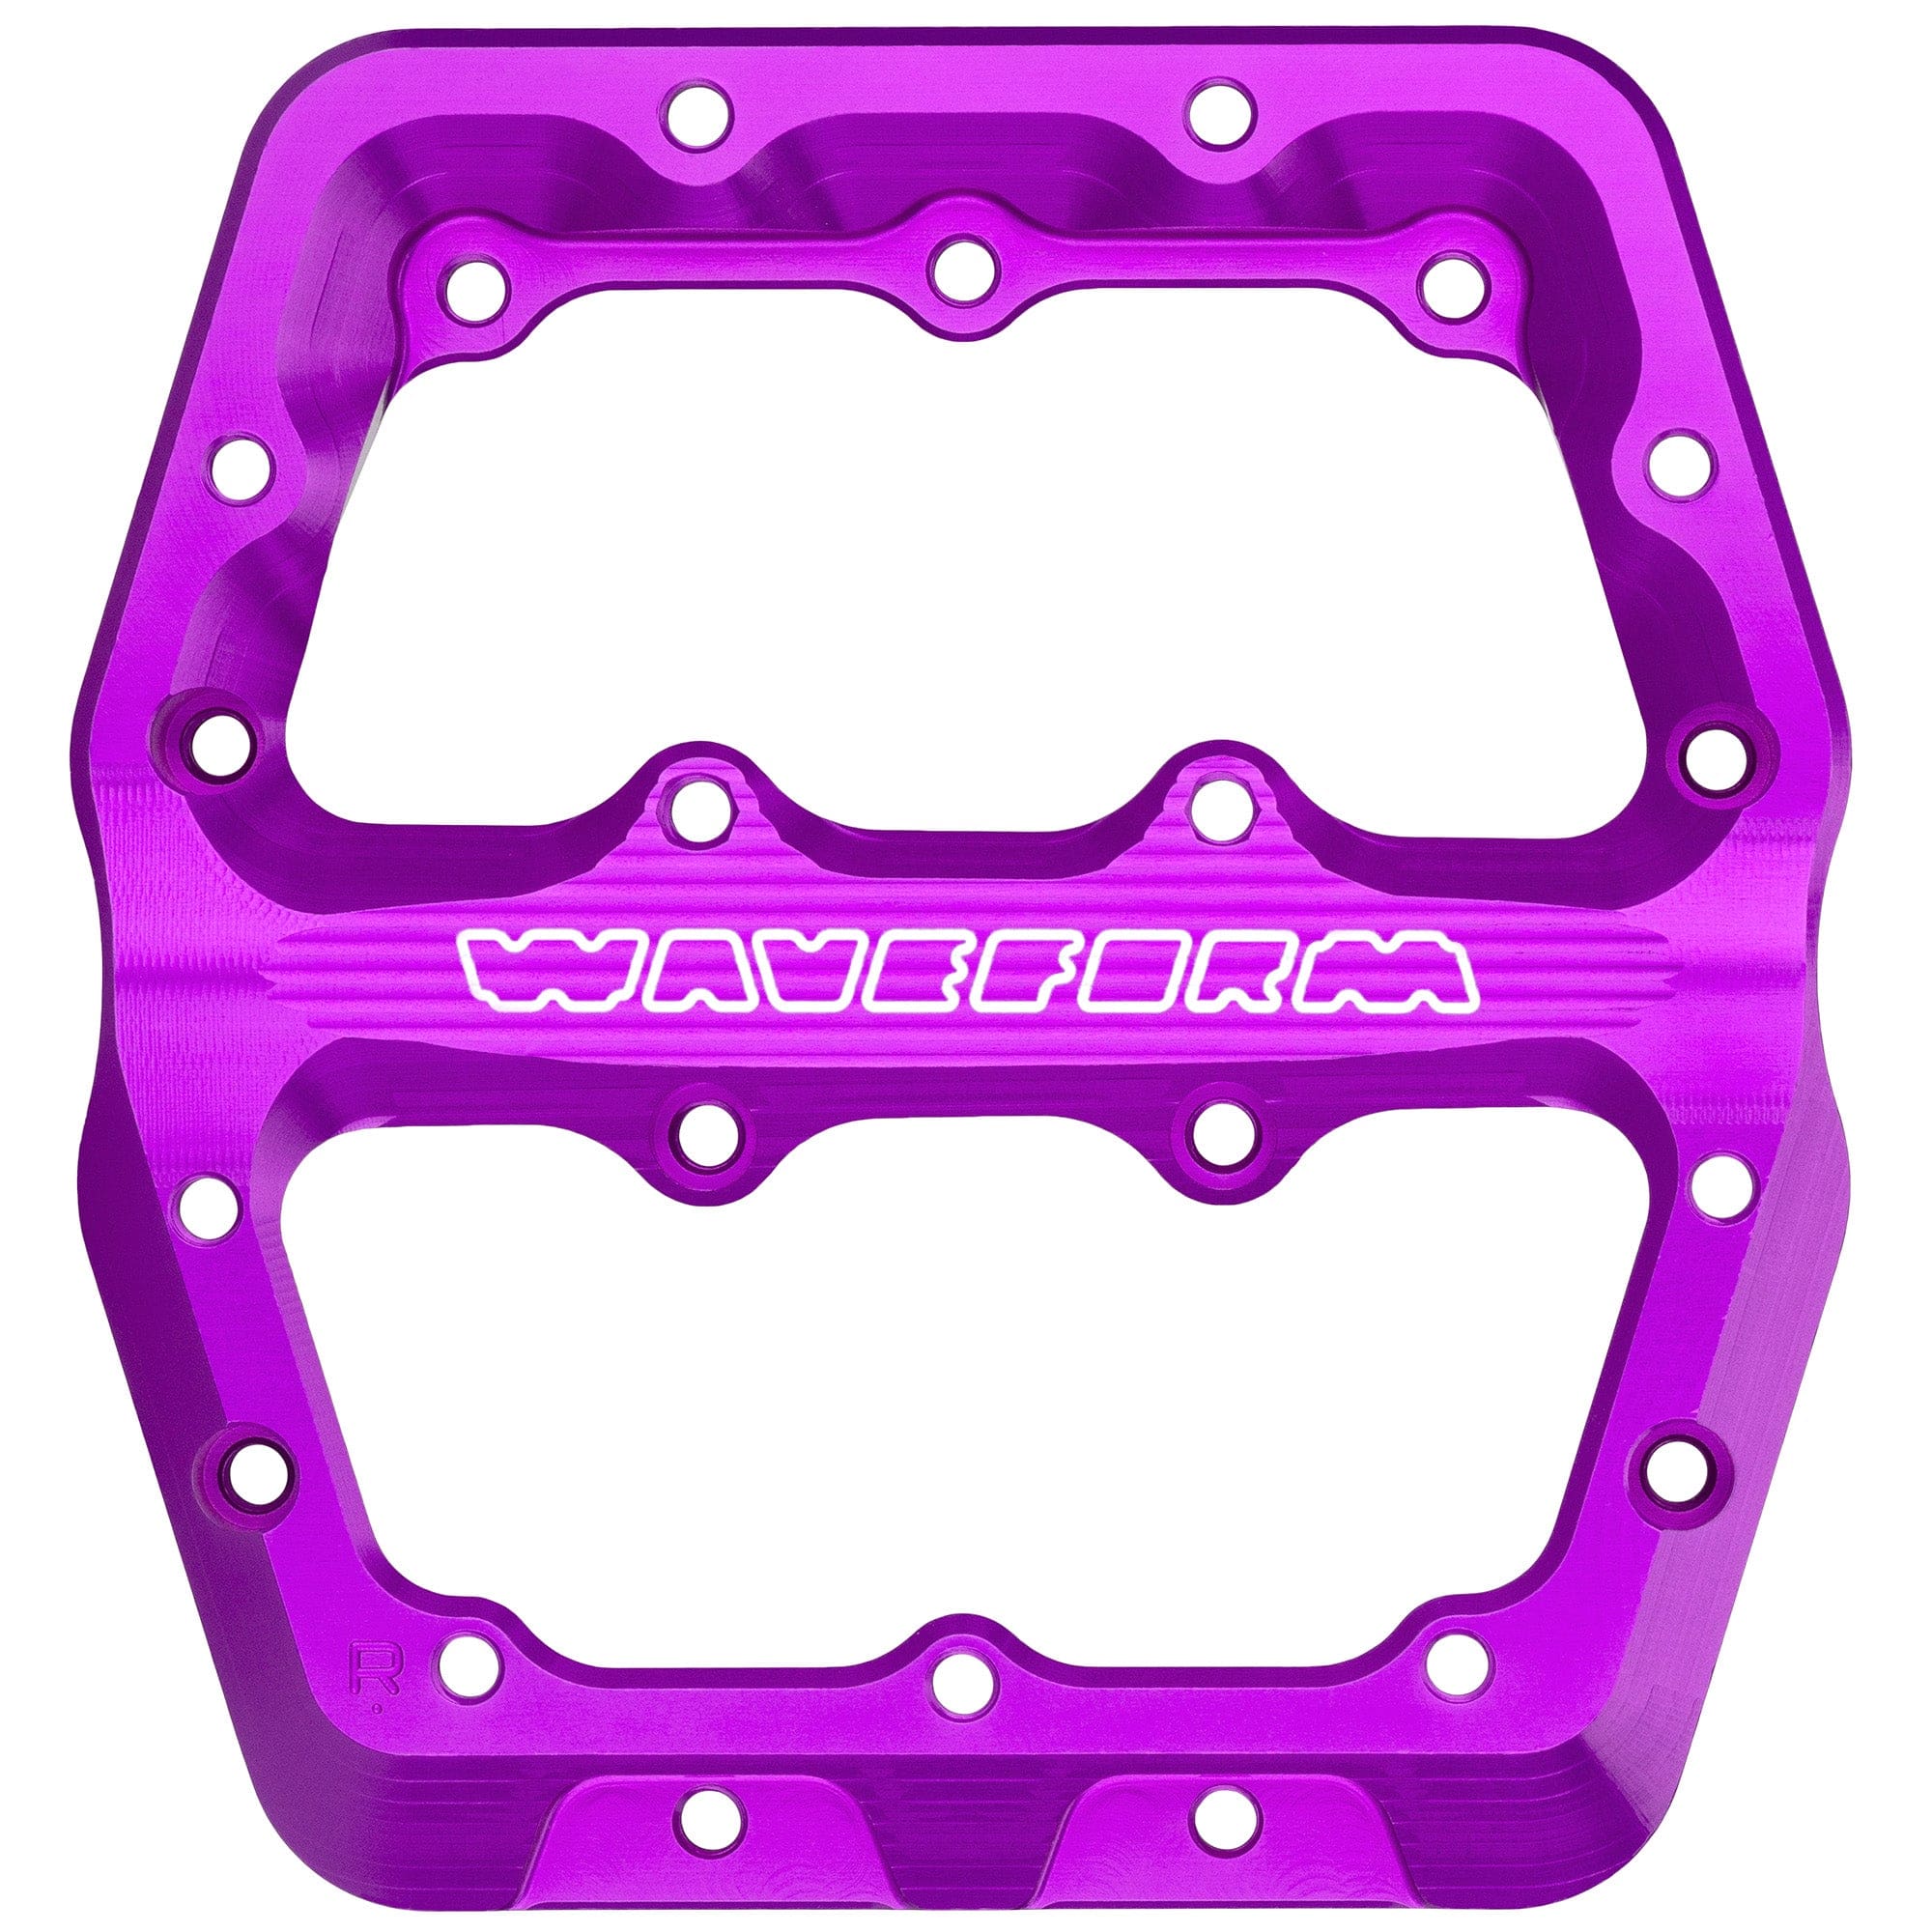 Large Right Pedal Body - Ultraviolet Purple Waveform Pedals Replacement Parts